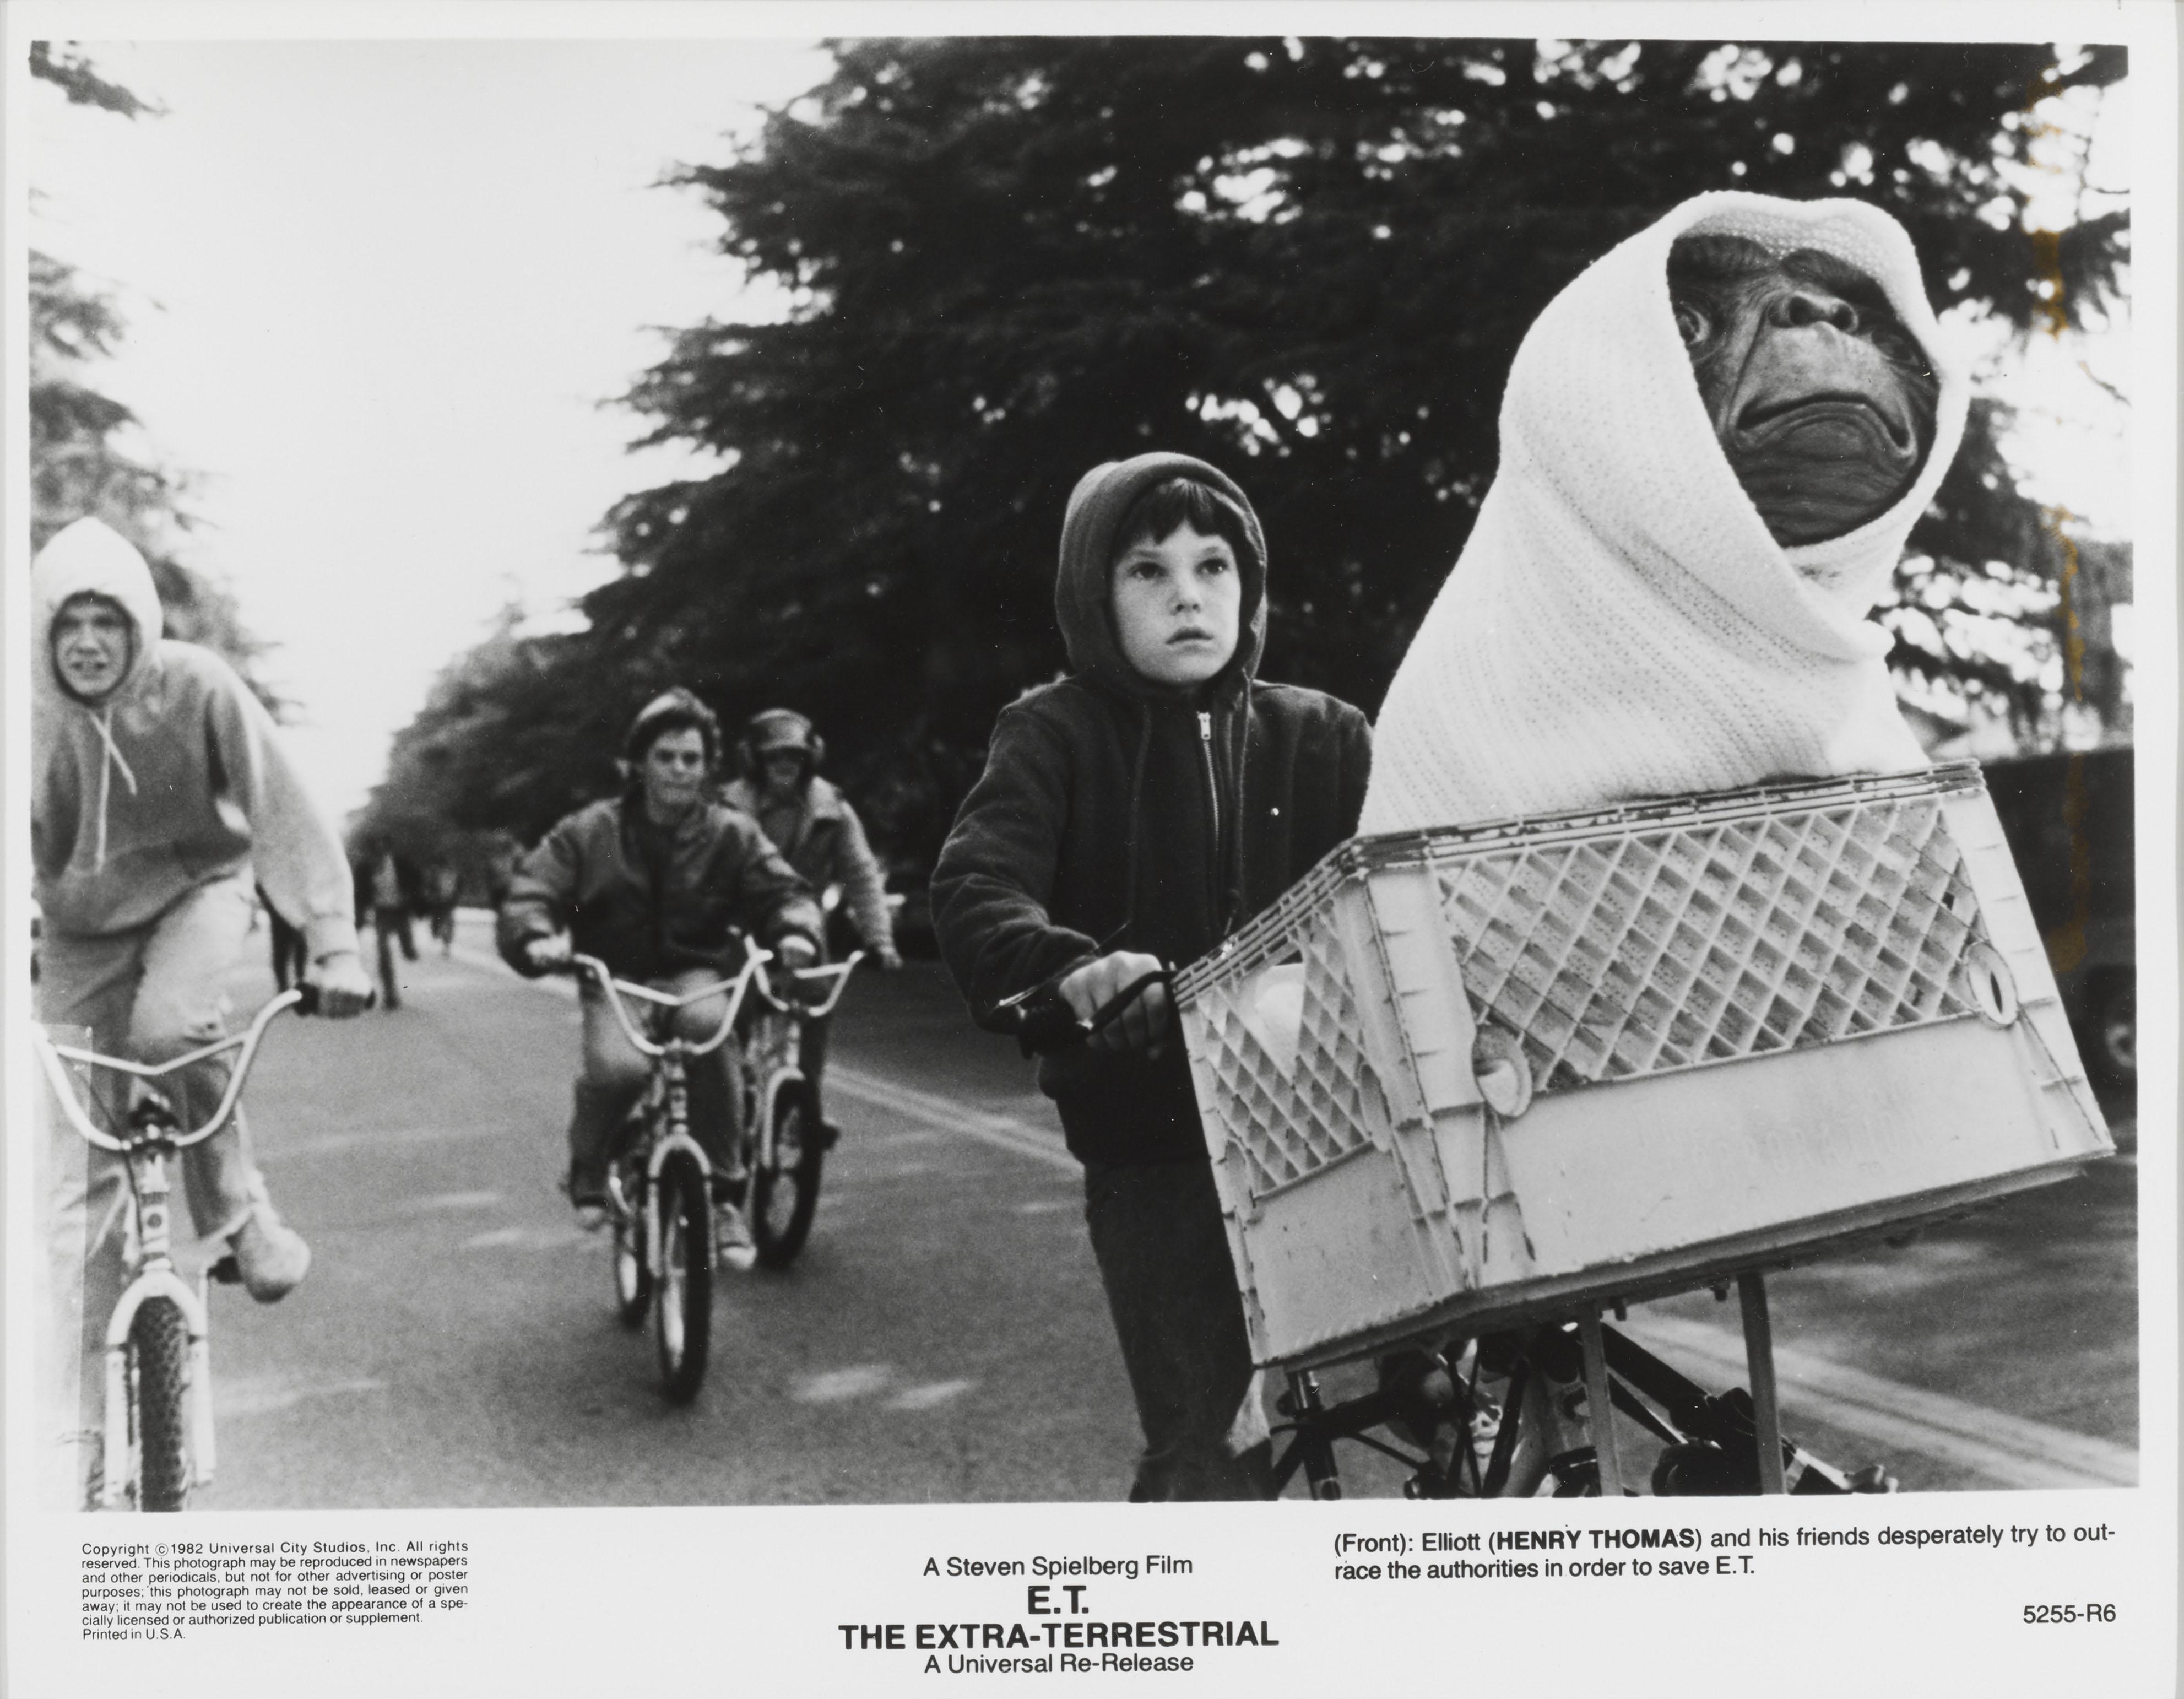 Original US studio production photo for Steven Spielberg's classic 1982 science fiction film E.T. This film starred Dee Wallace, Drew Barrymore and Peter Coyote.
This piece is conservation framed with UV Plexiglas and would be shipped boxed by